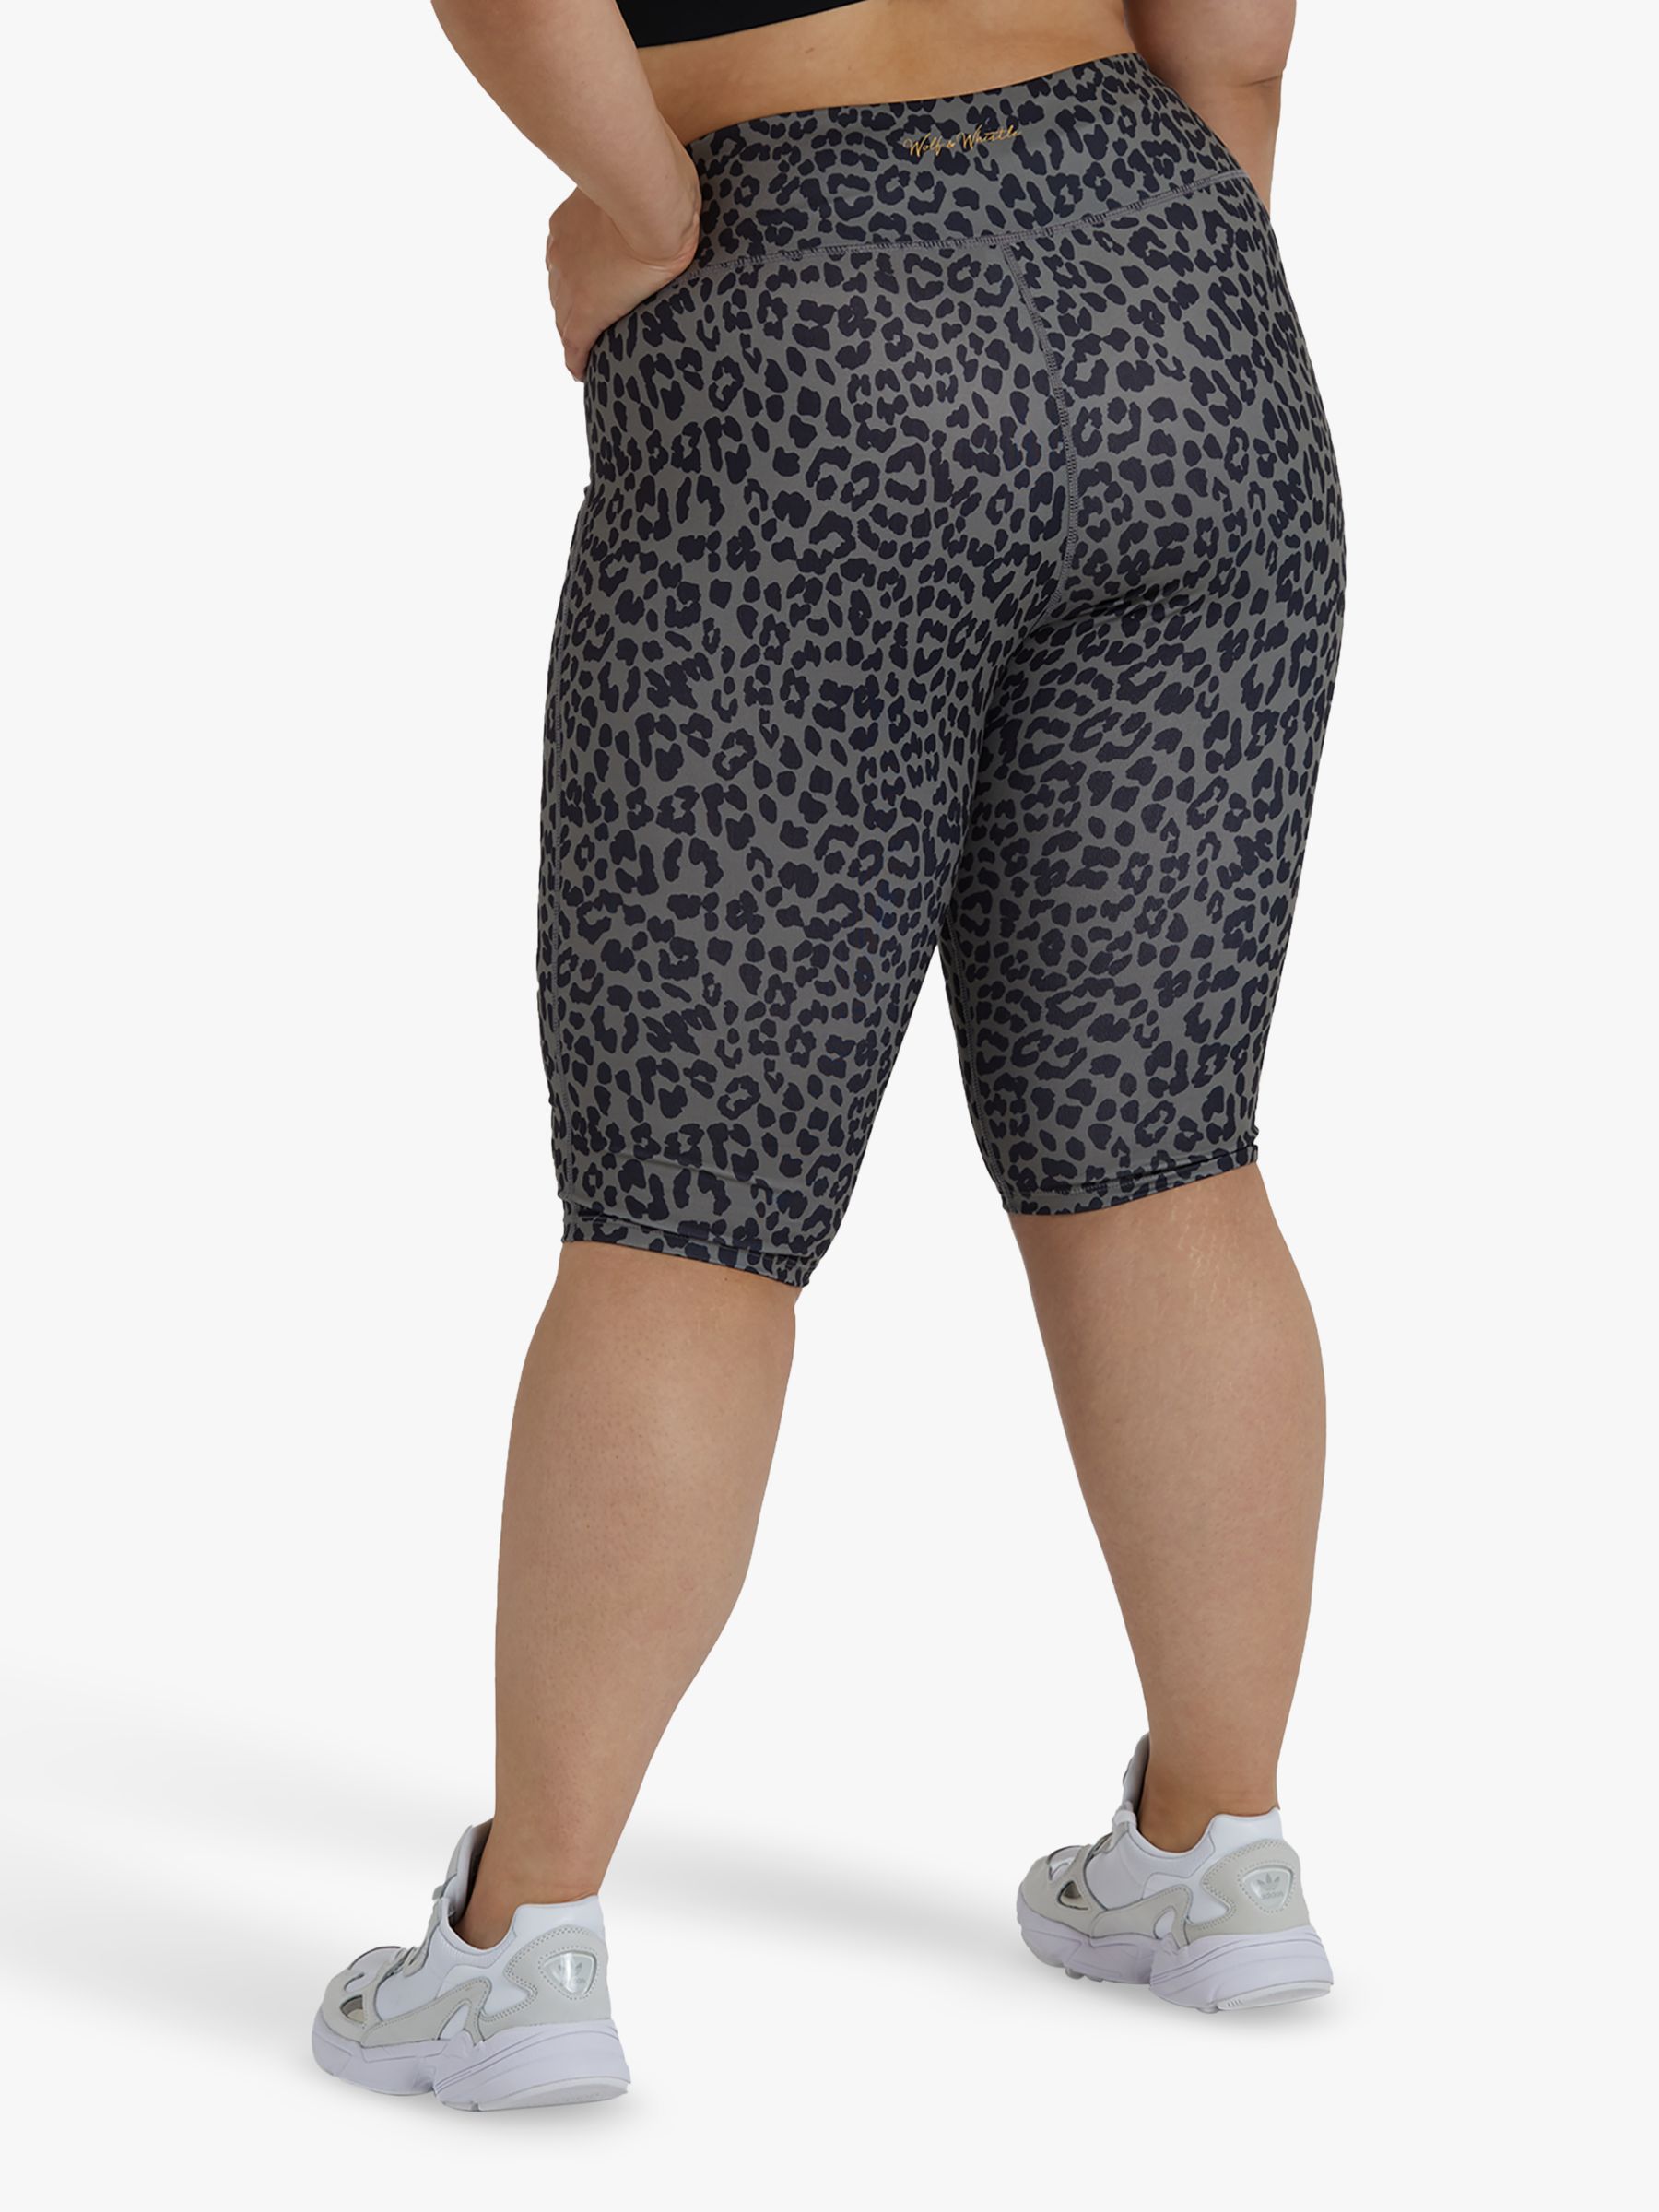 Buy Wolf & Whistle Curve Leopard Shorts, Dusty Olive Online at johnlewis.com